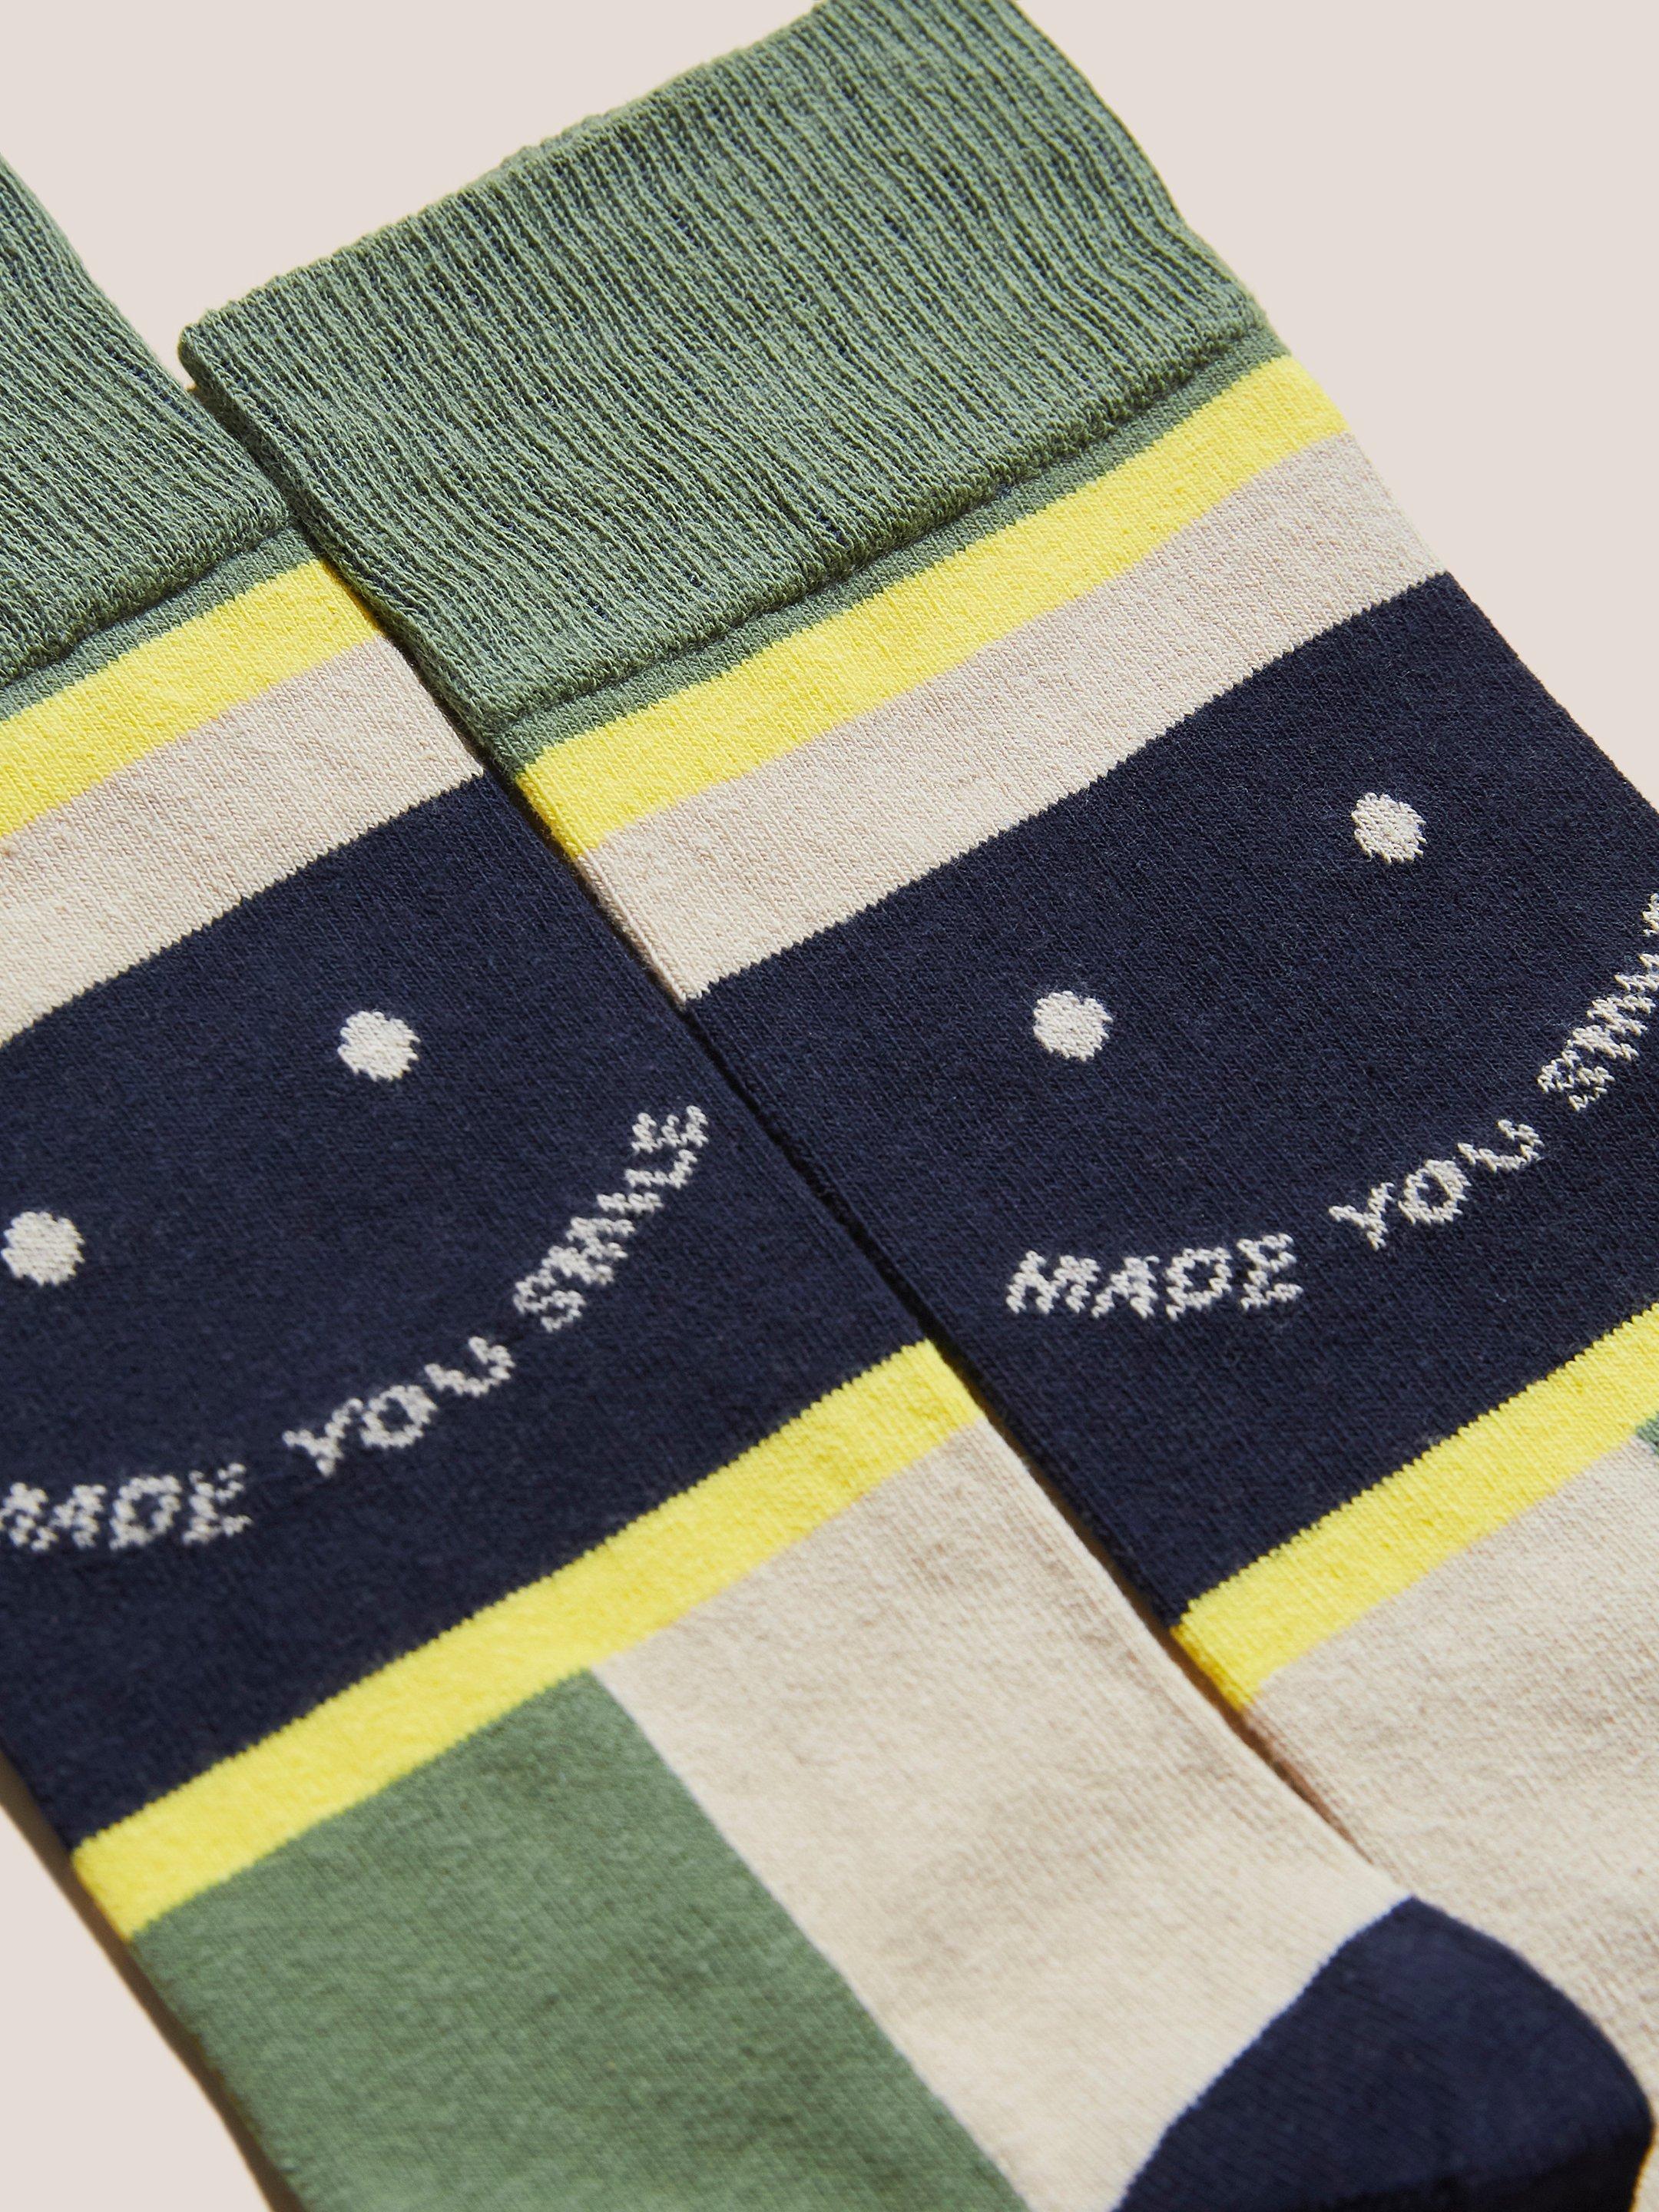 Made You Smile Socks in GREEN MLT - FLAT DETAIL